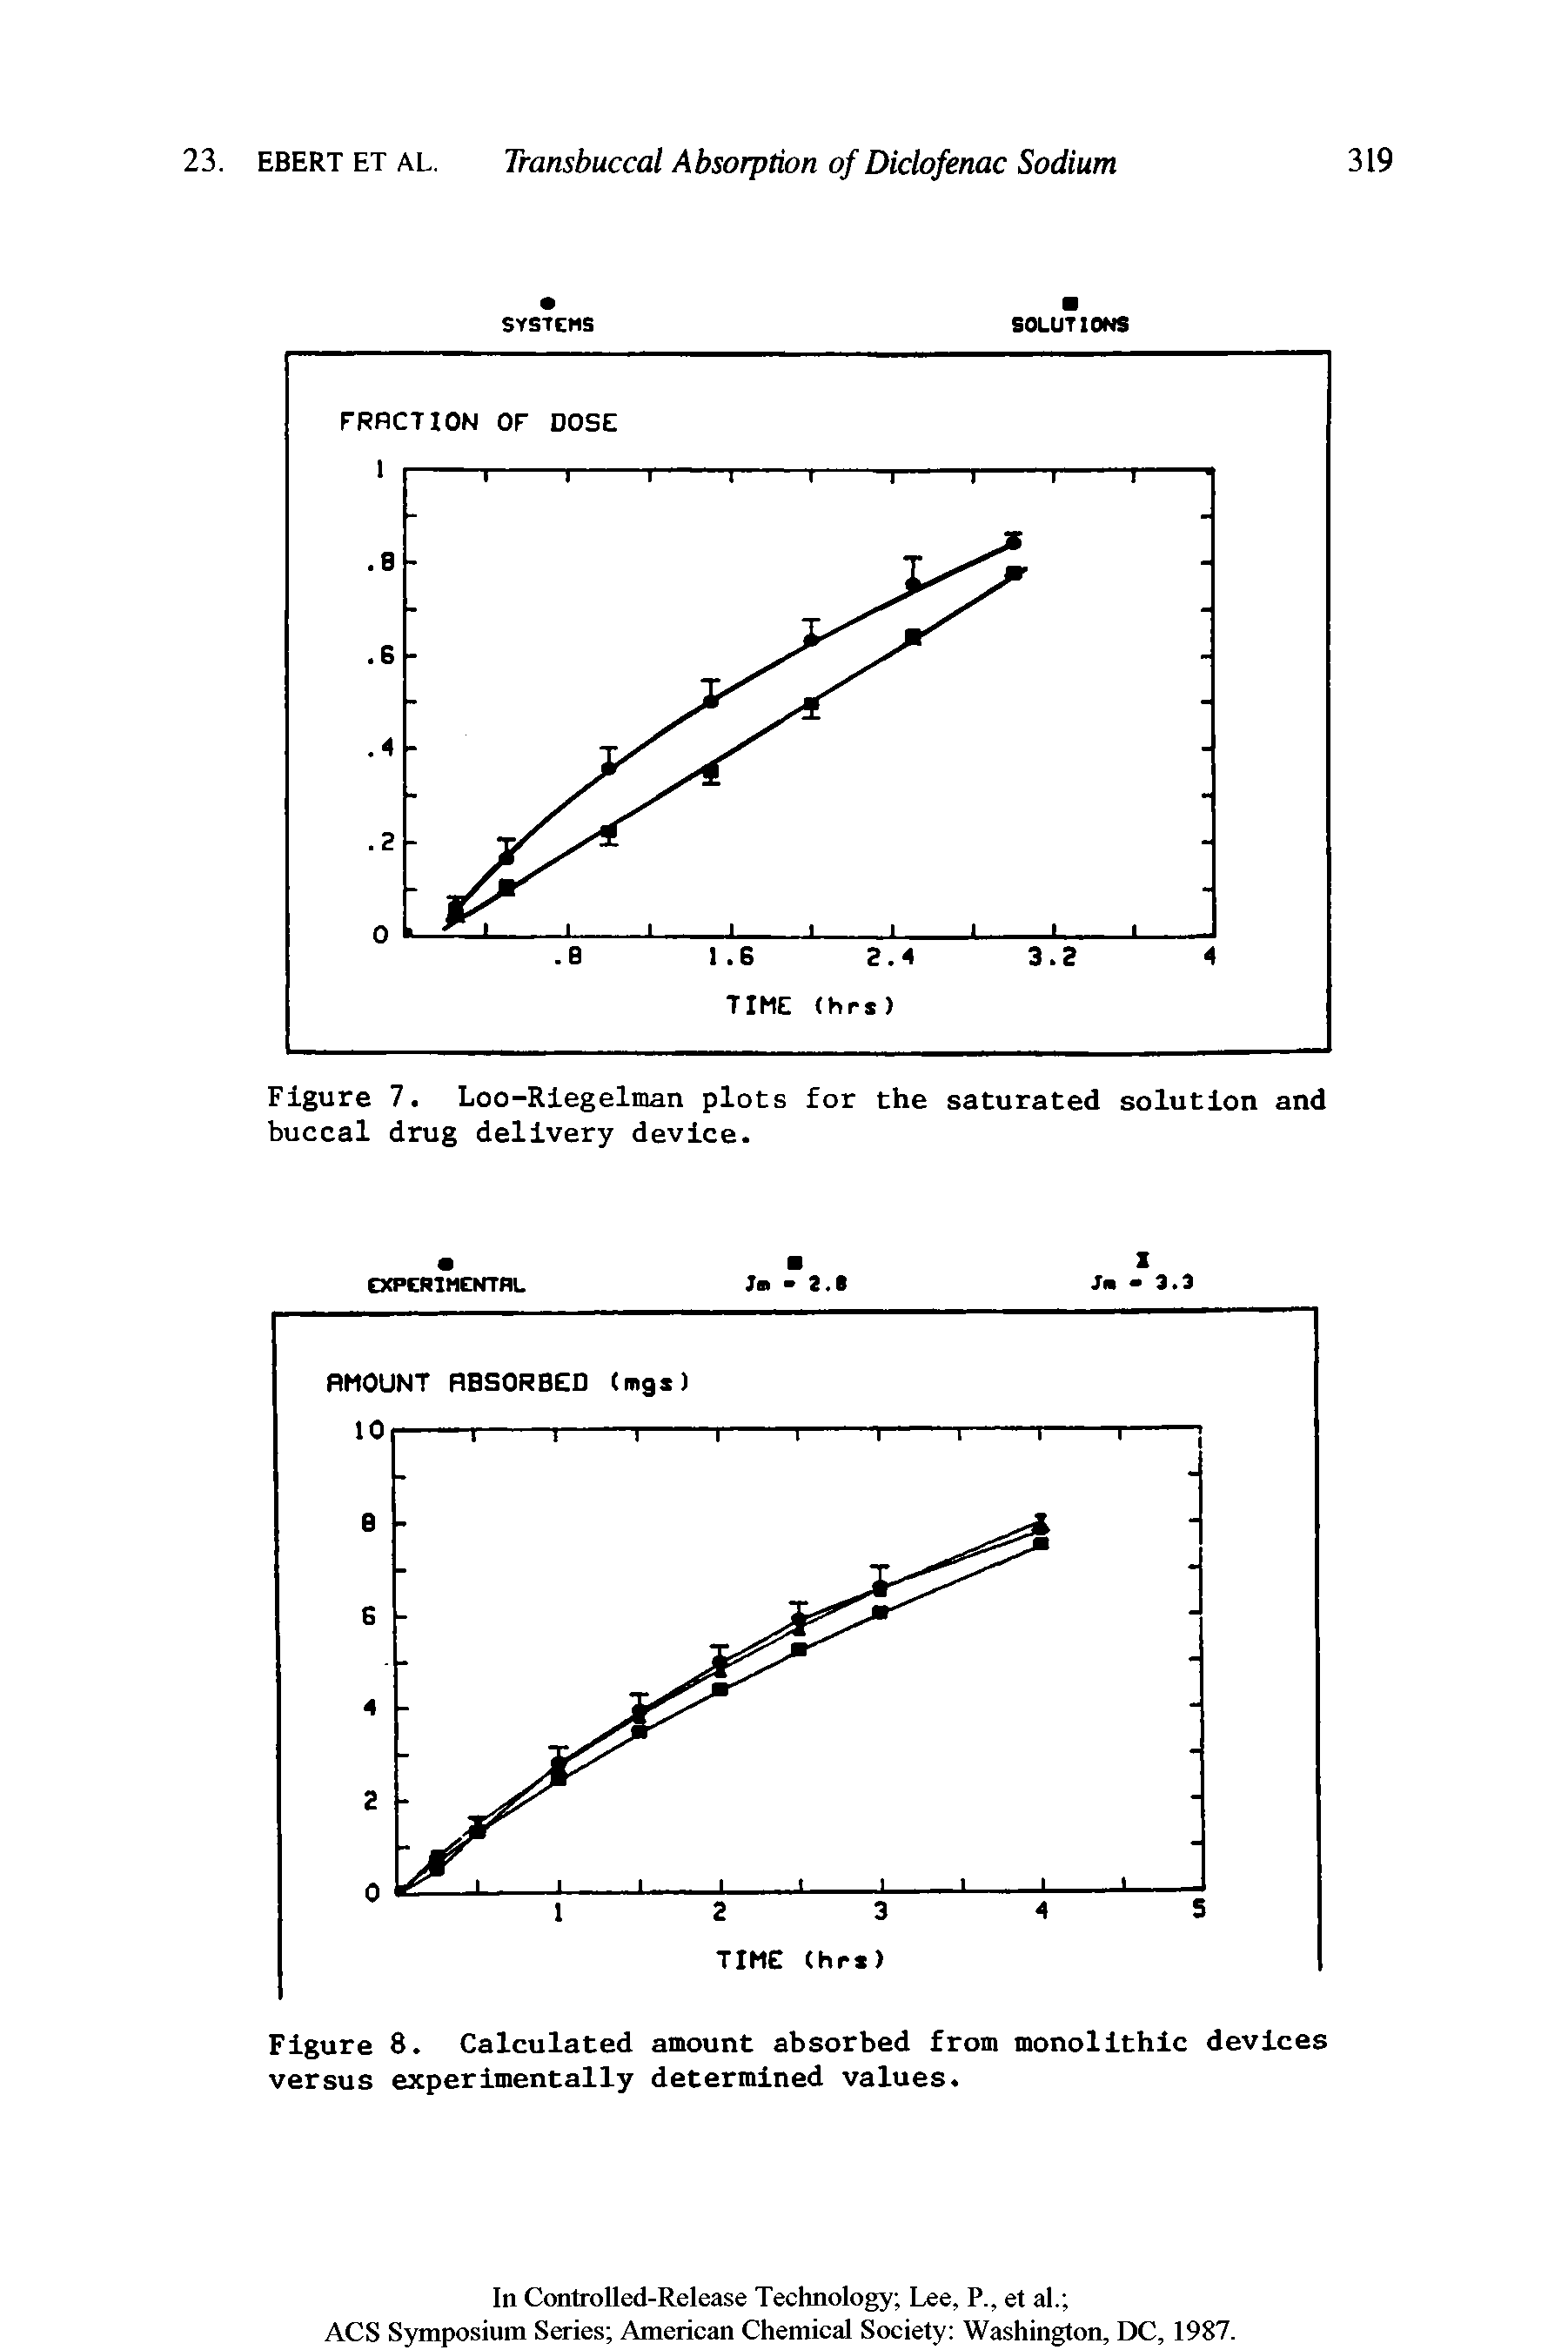 Figure 7. Loo-Riegelman plots for the saturated solution and buccal drug delivery device.